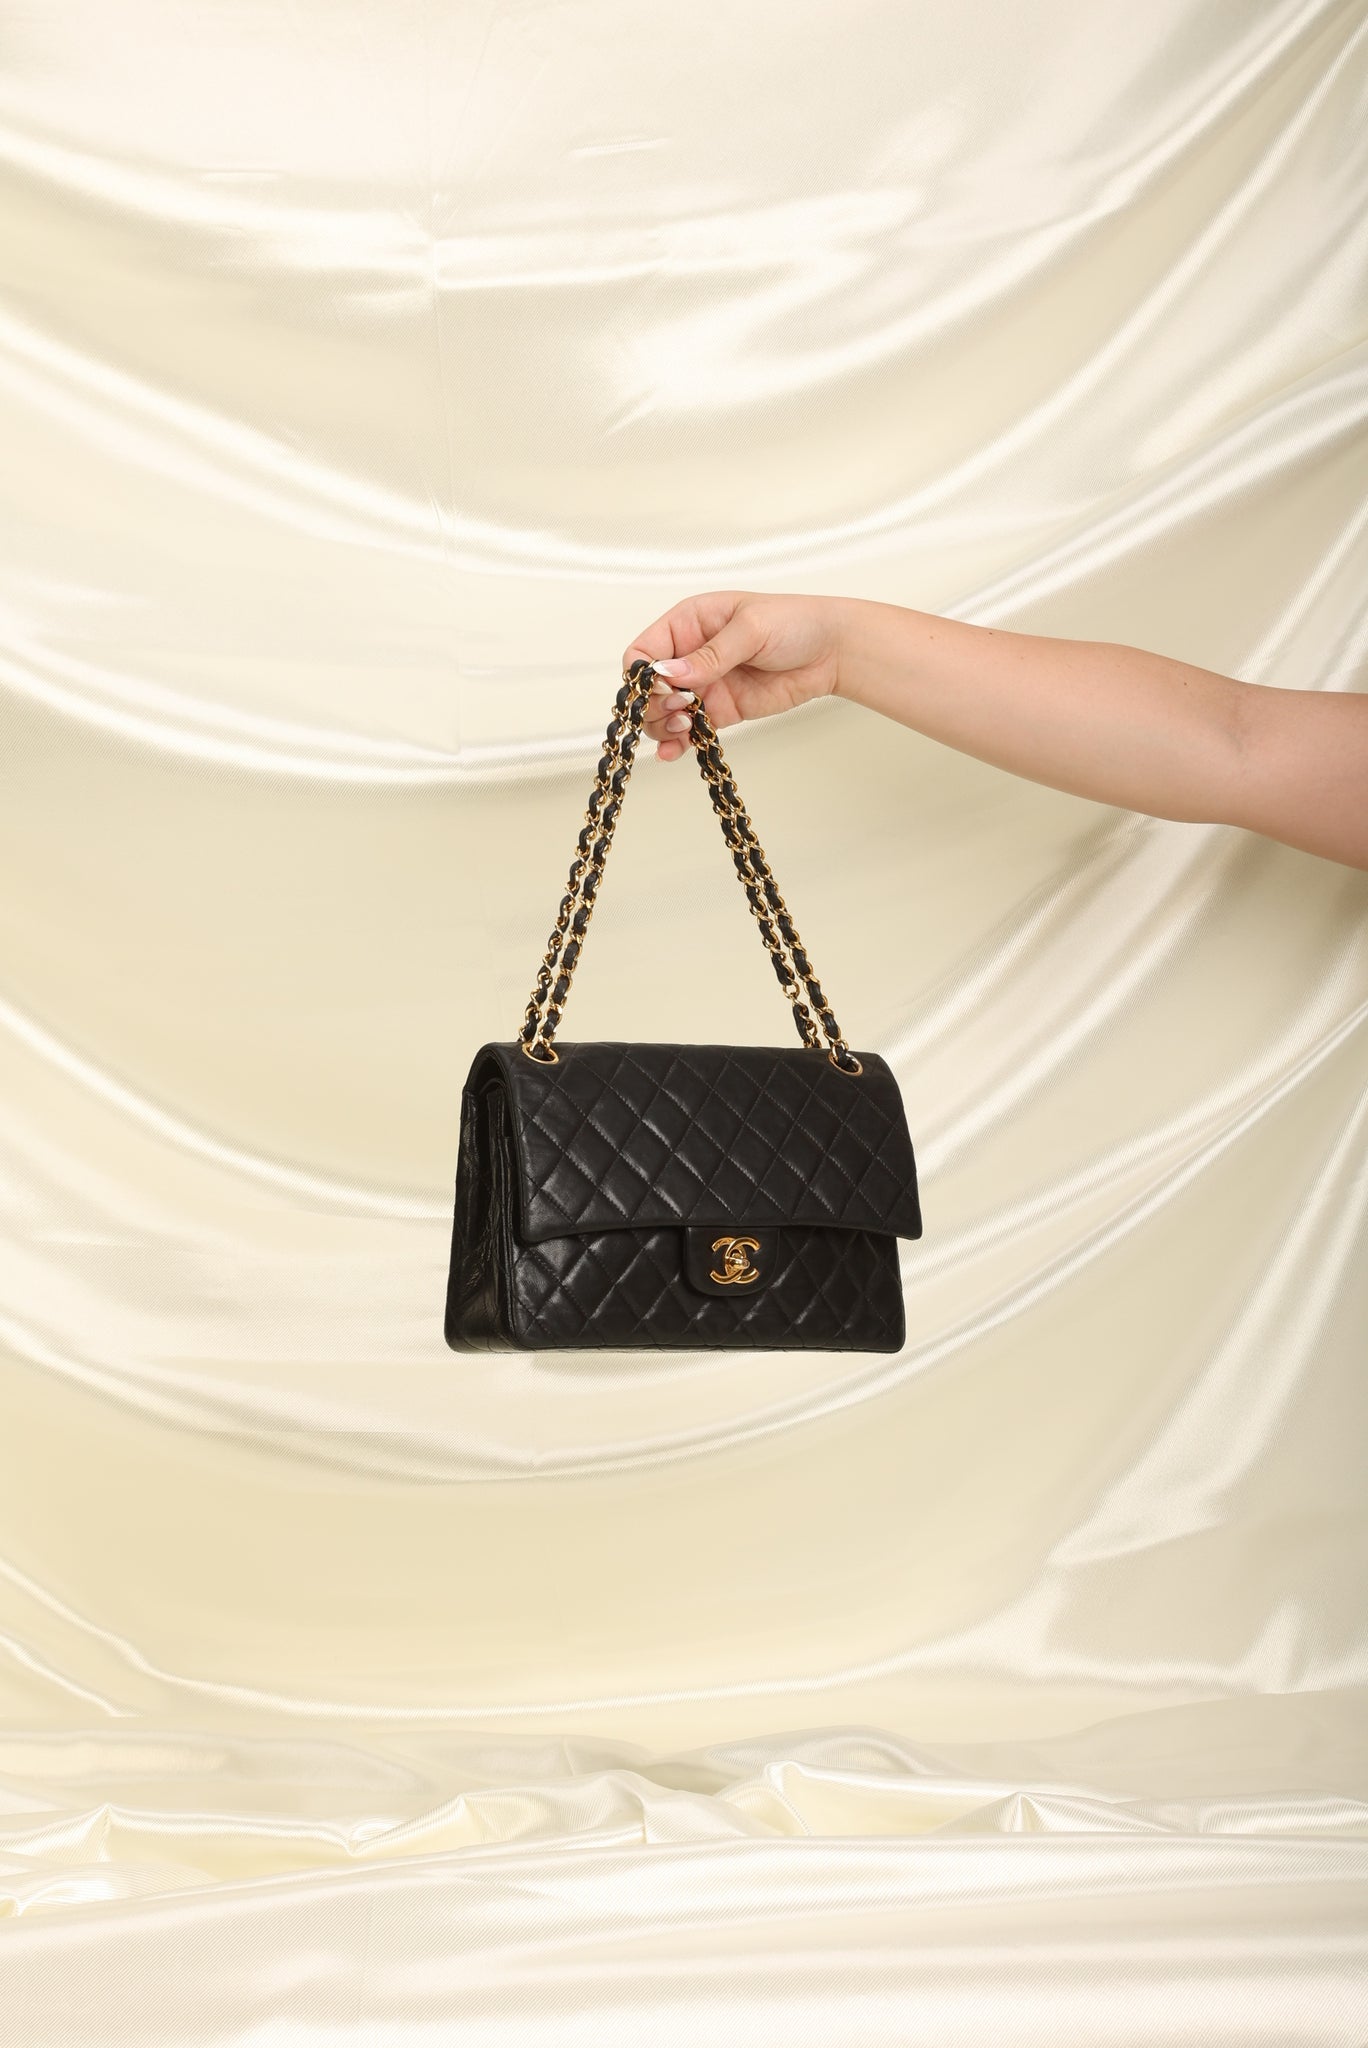 chanel timeless classic flap bag